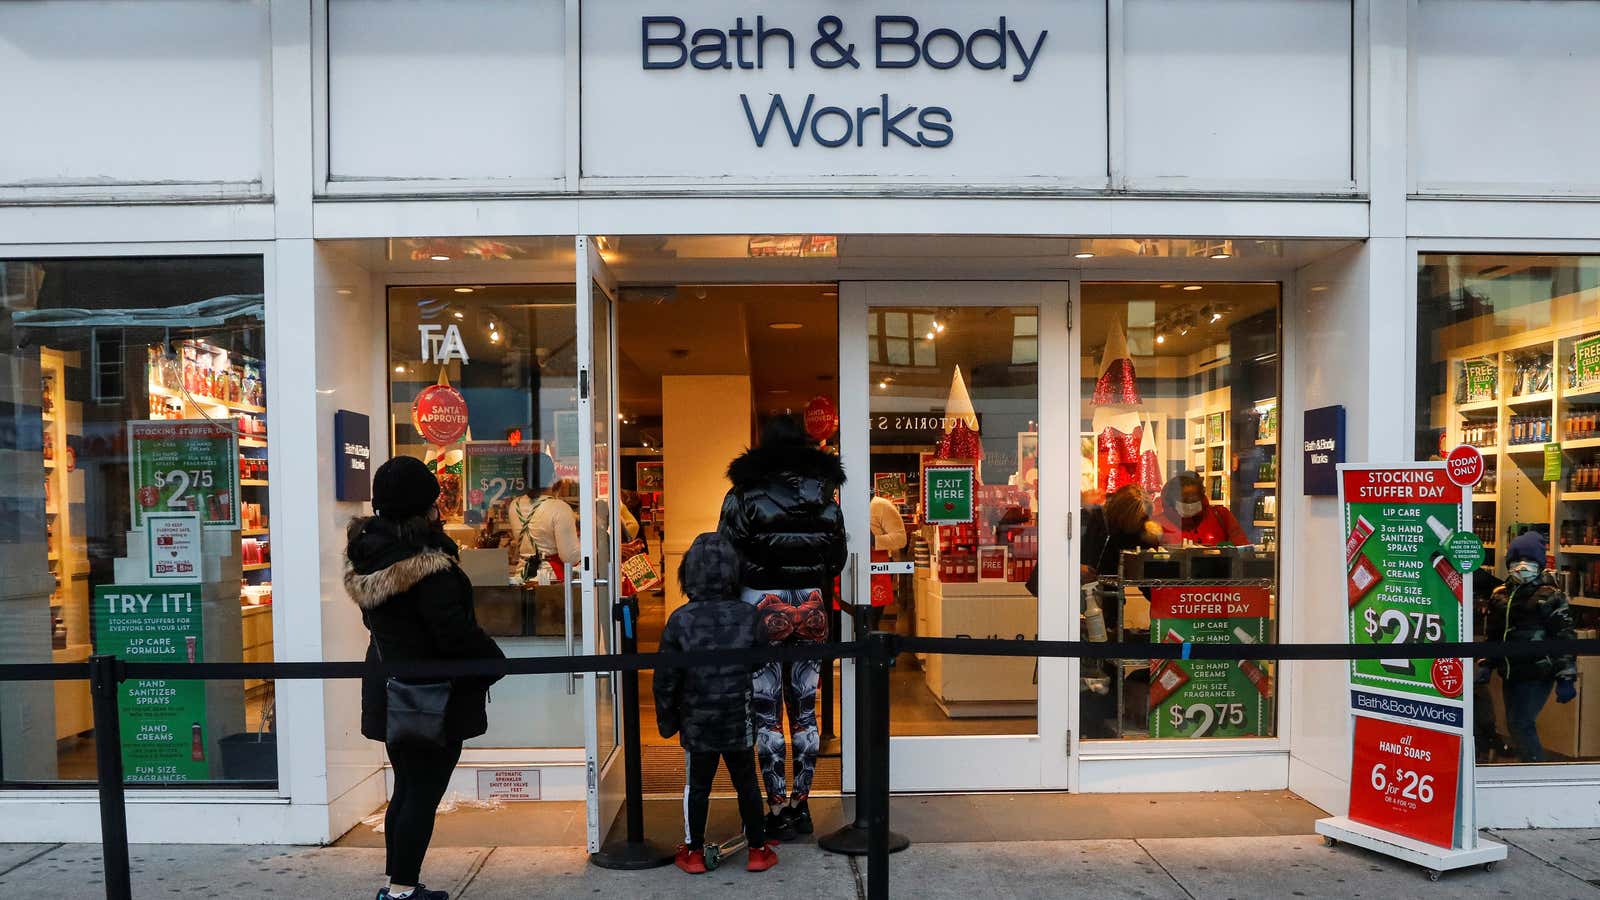 Self-care is helping retailers stay afloat